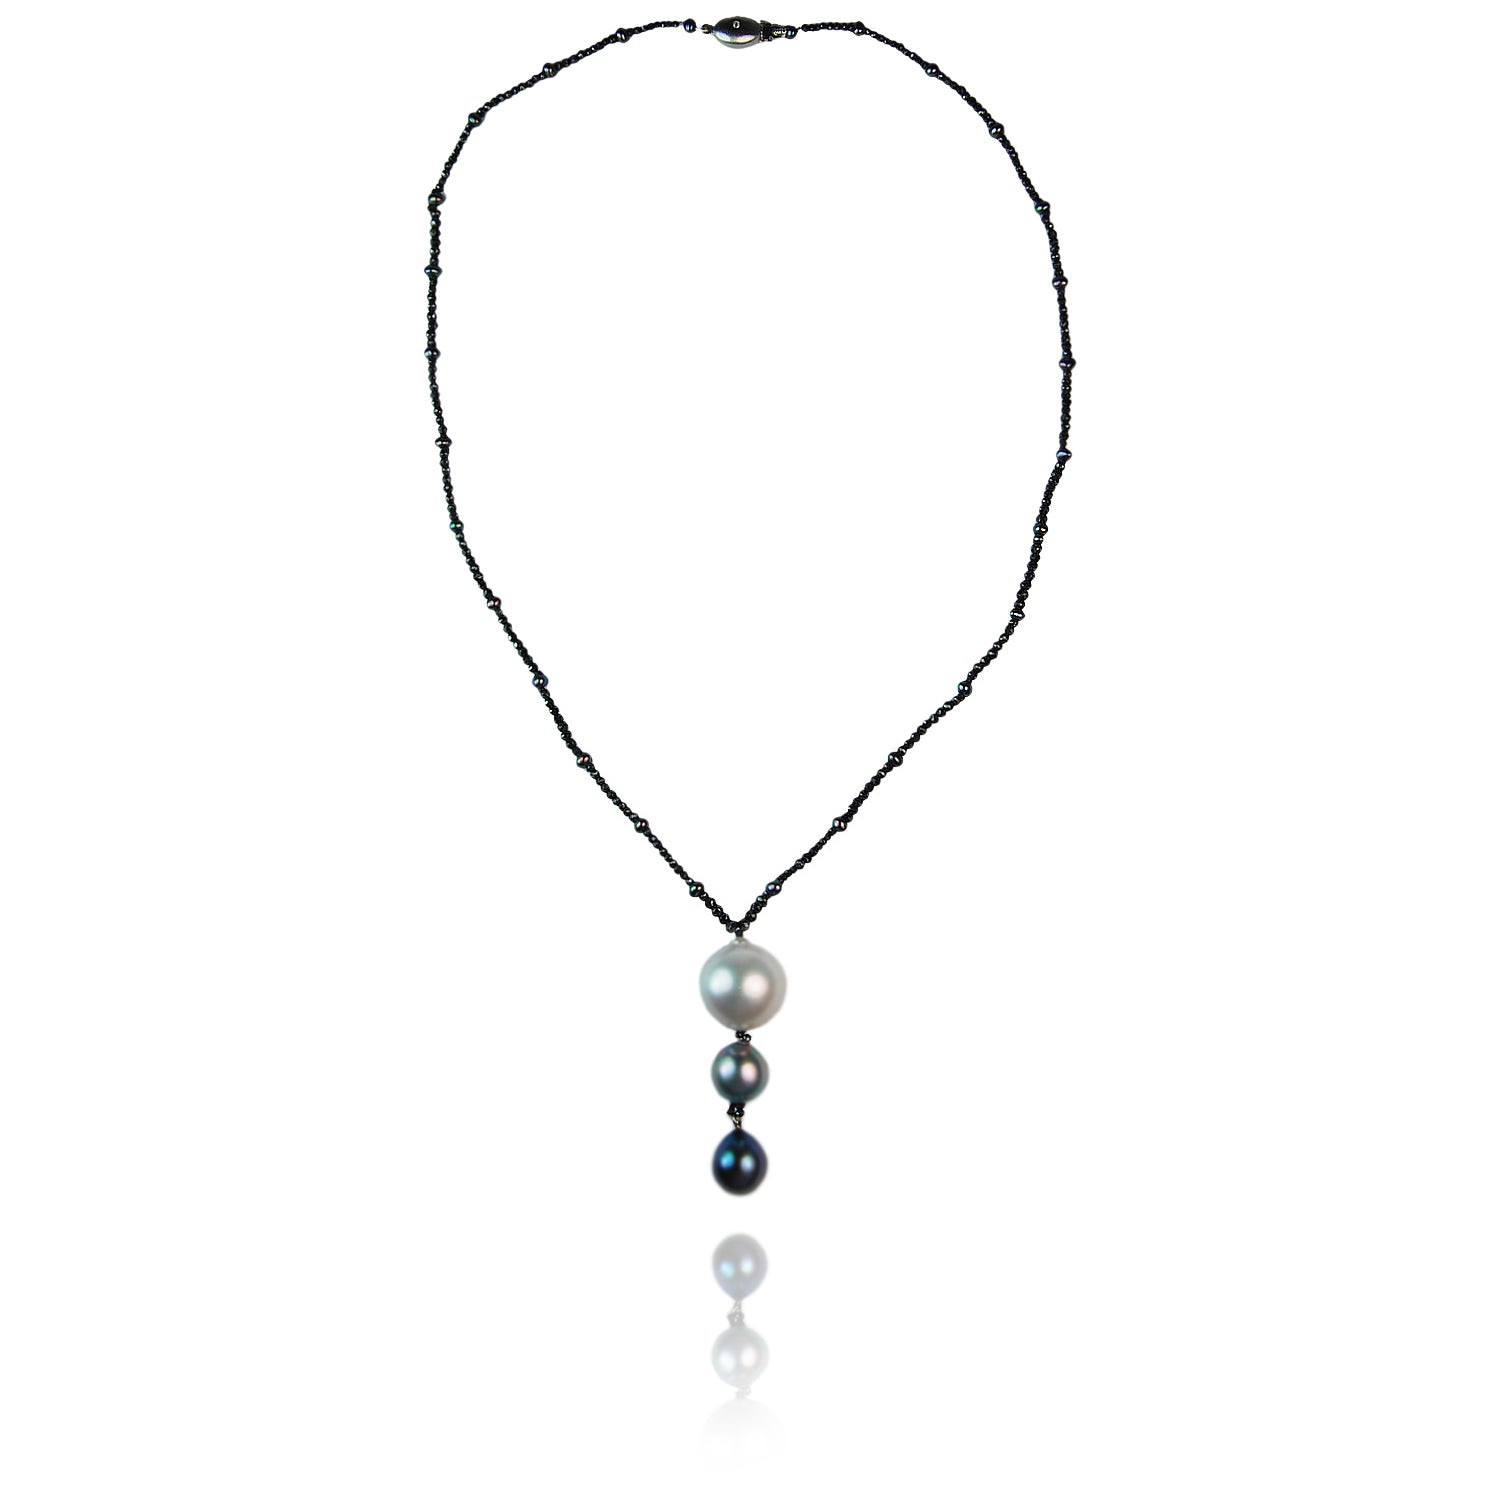 Black Diamond Necklace  With South Sea And Tahitian Pearl Pendant Drop